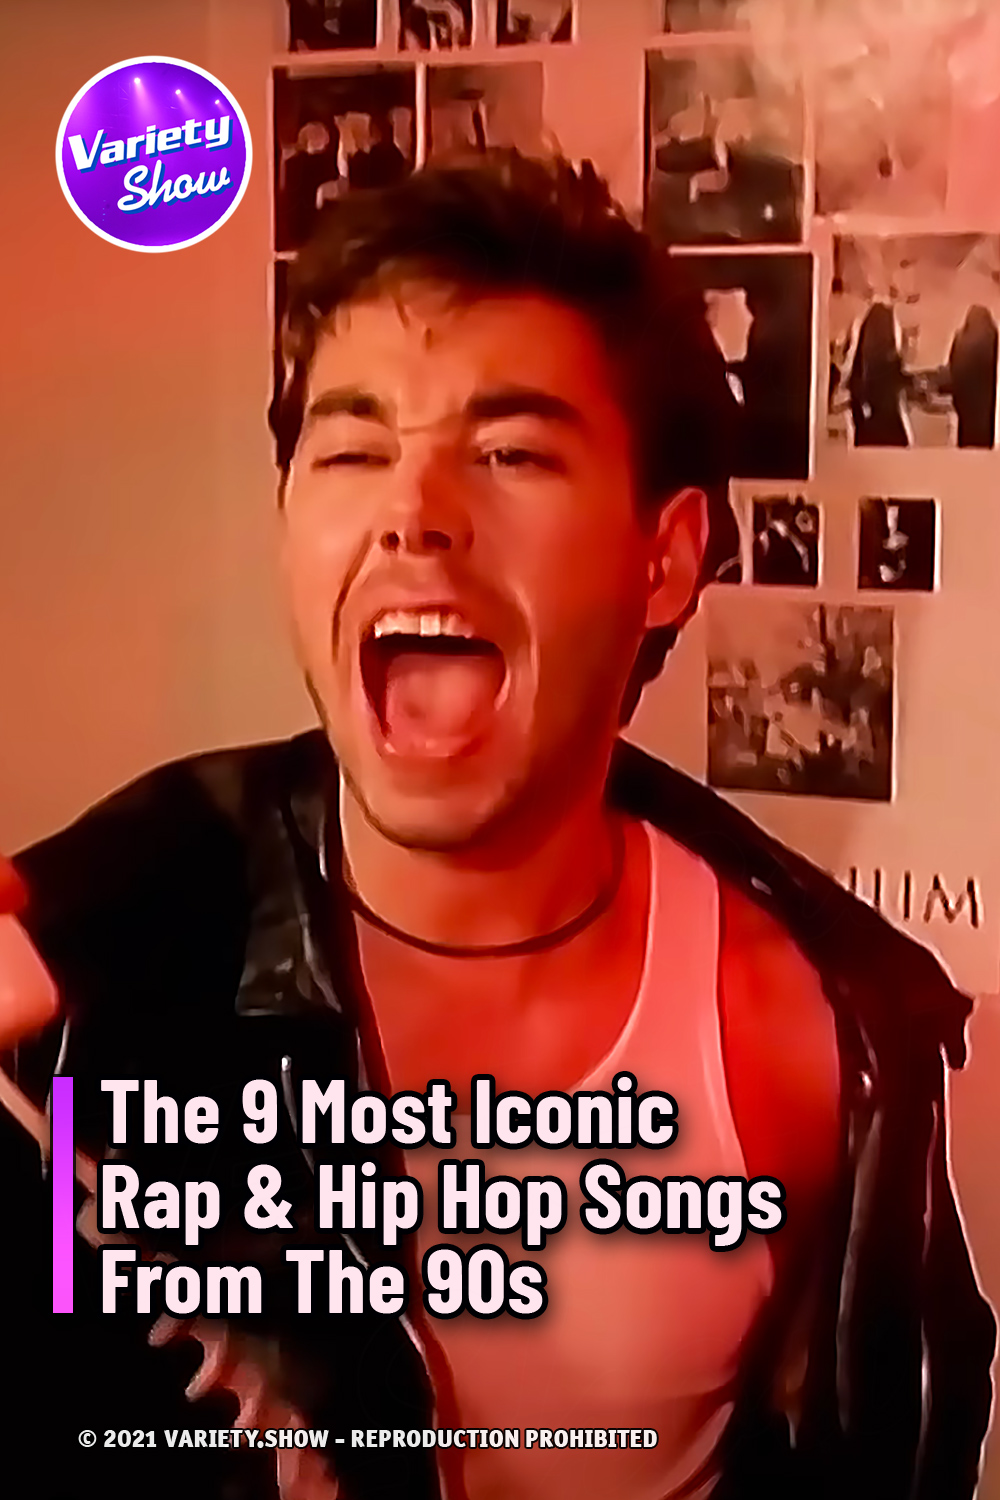 The 9 Most Iconic Rap & Hip Hop Songs From The 90s